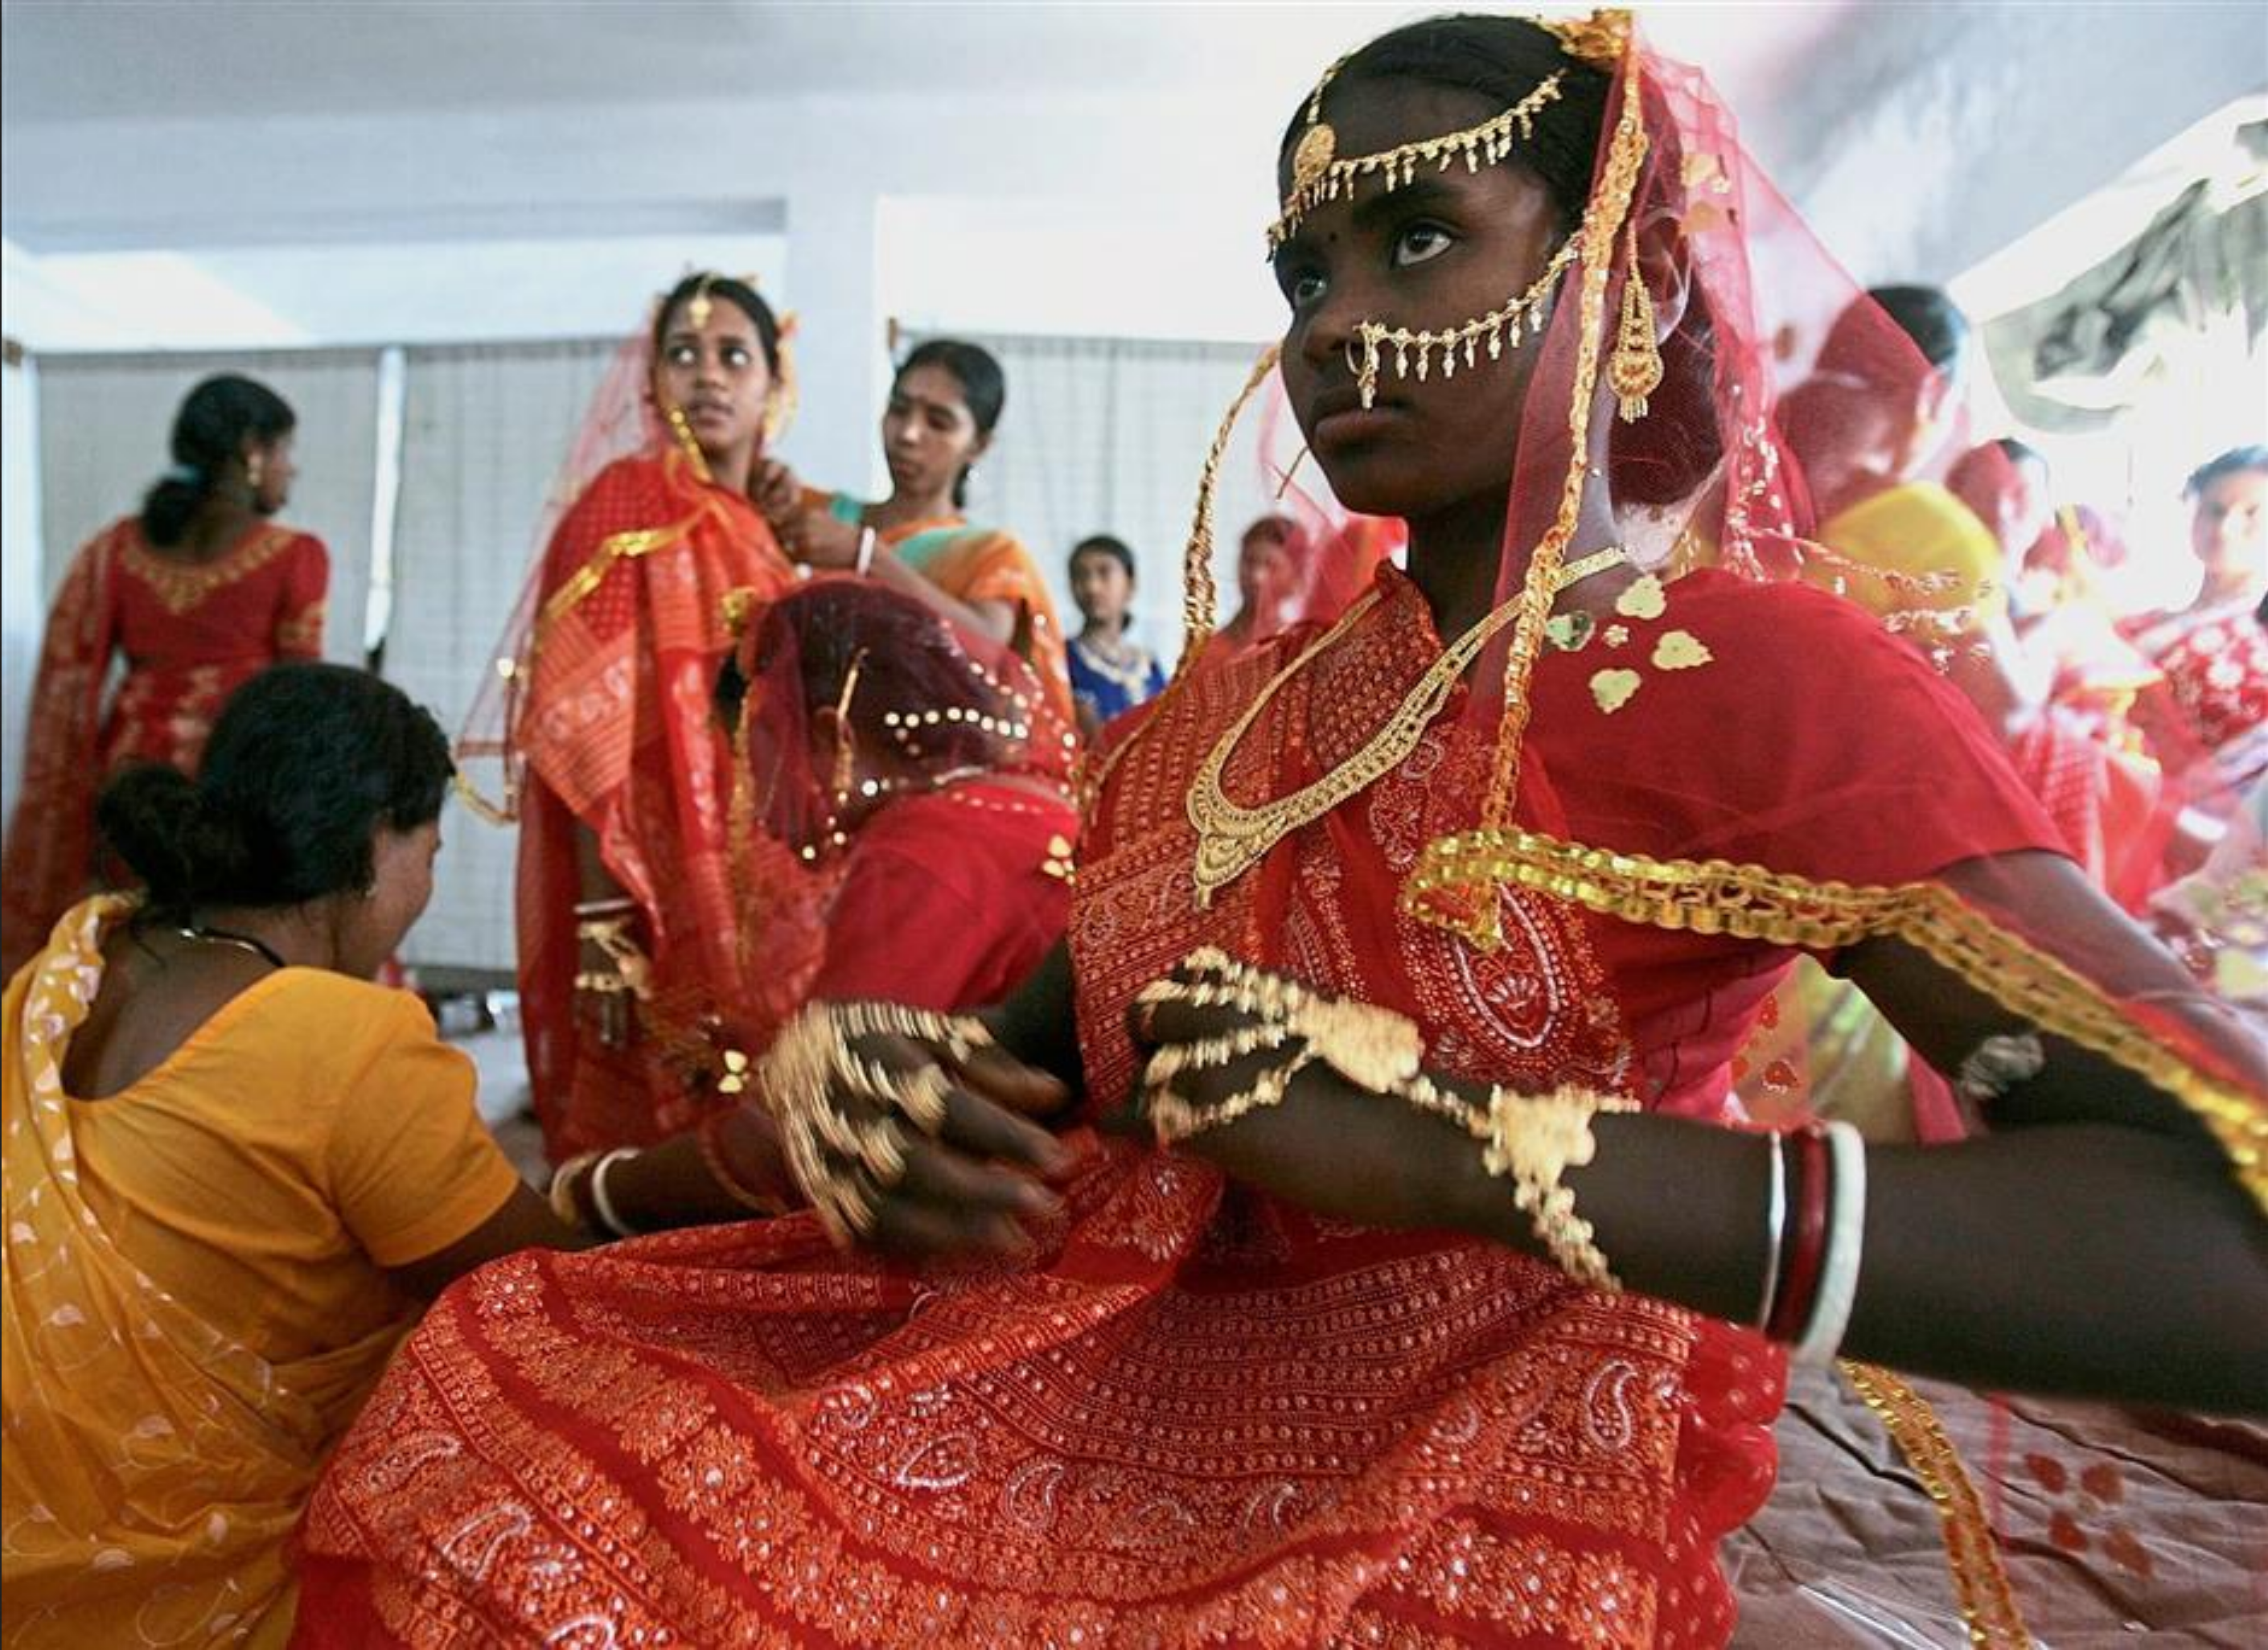 Significant Decline in Child Marriages Across India